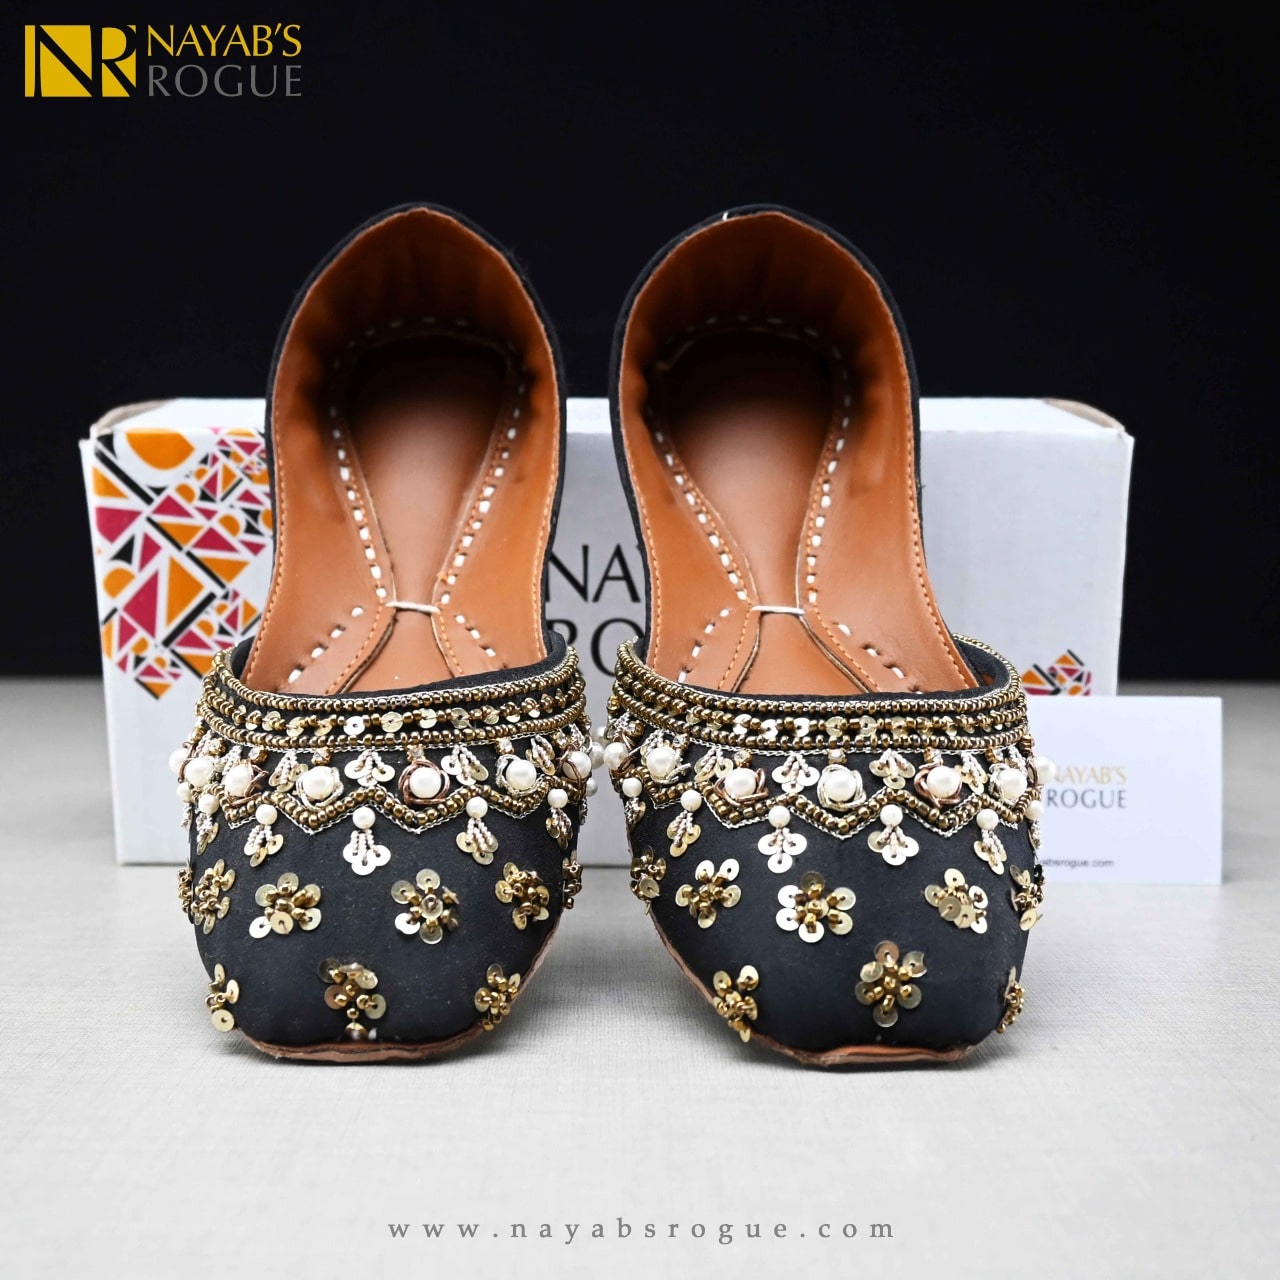 Nawabi Khussa in Luxurious Leather